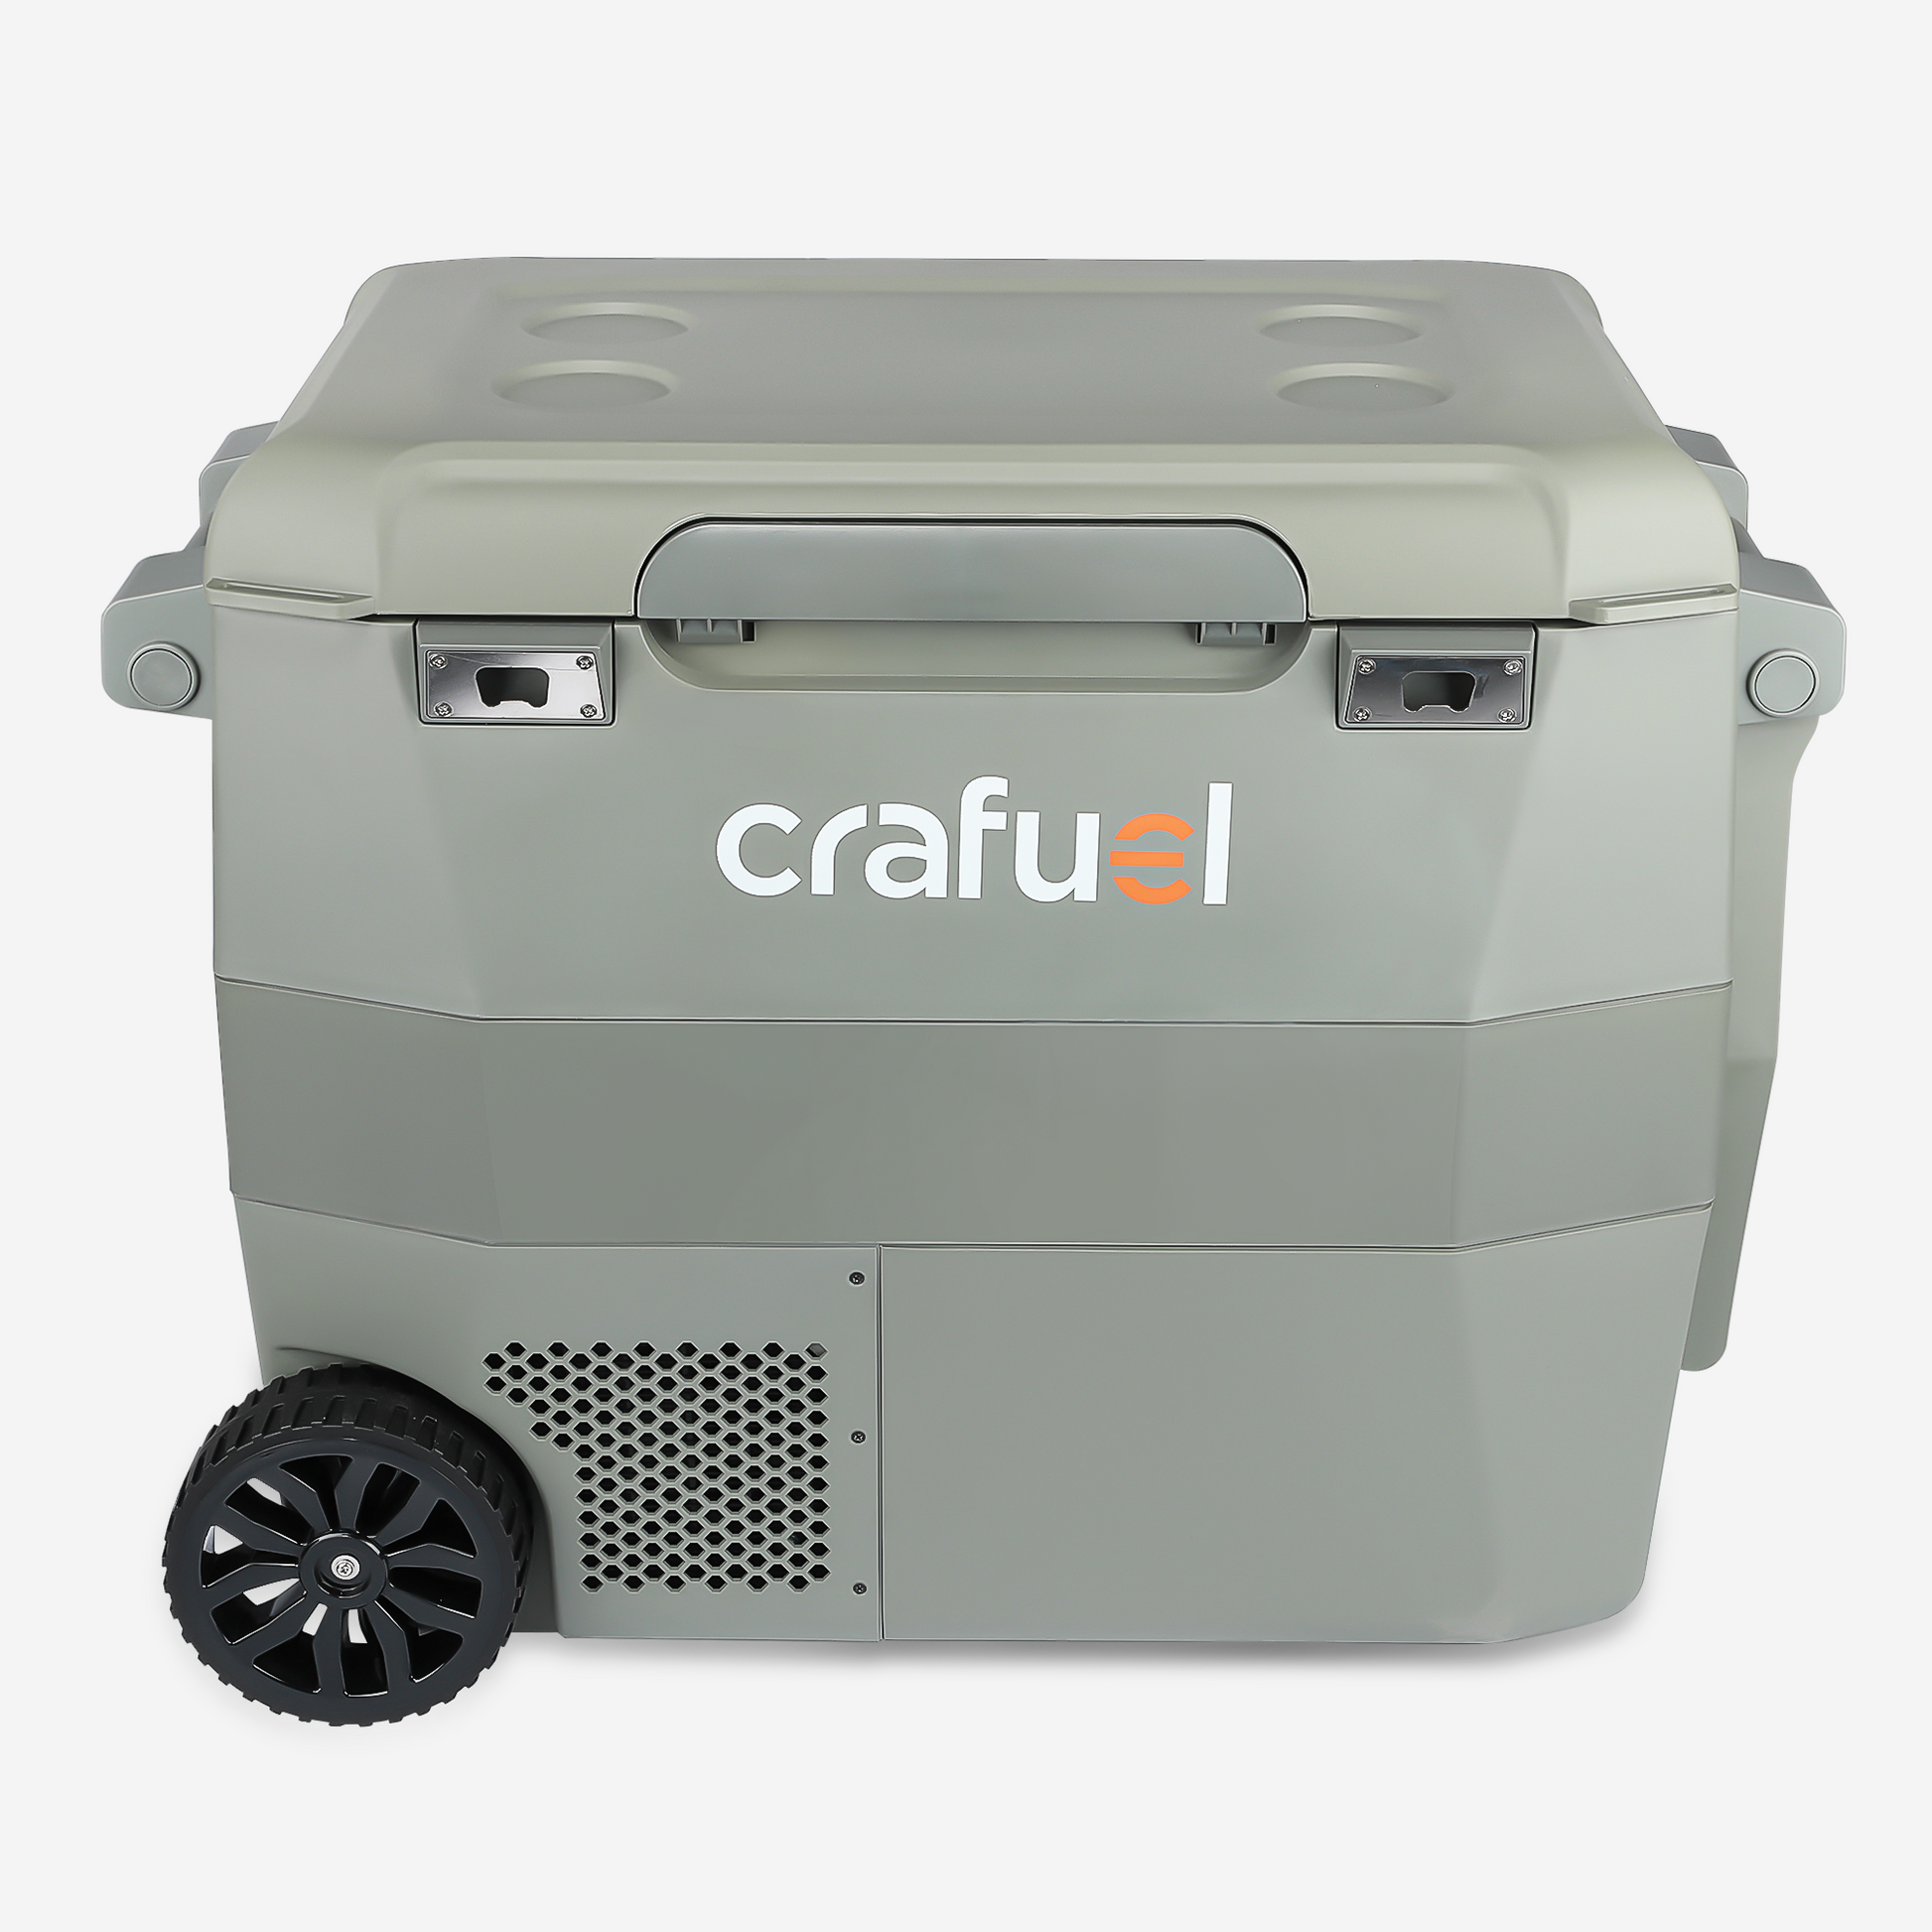 Crafuel PoleT 57L/65QT Portable Freezer, Wheeled Cooler, 12V DC Car Fridge, Turbo Fast Cooling Mode, -4°F~50°F, 110-240V AC for Outdoor, Camping, RV, Truck and Boat